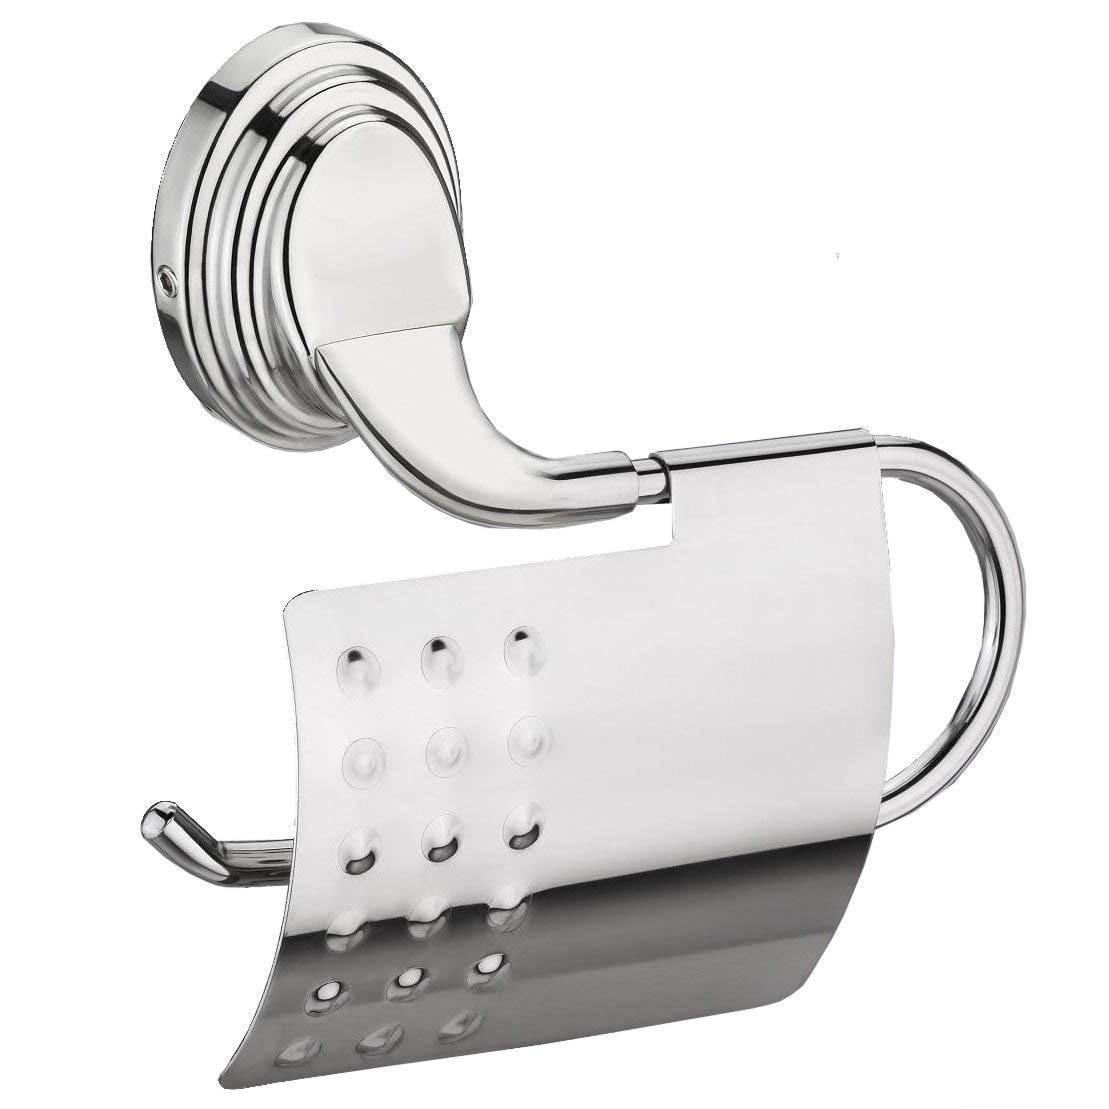 Plantex Platinum Stainless Steel 304 Grade Cubic Toilet Paper Roll Holder/Toilet Paper Holder in Bathroom/Kitchen/Bathroom Accessories(Chrome) - Pack of 3